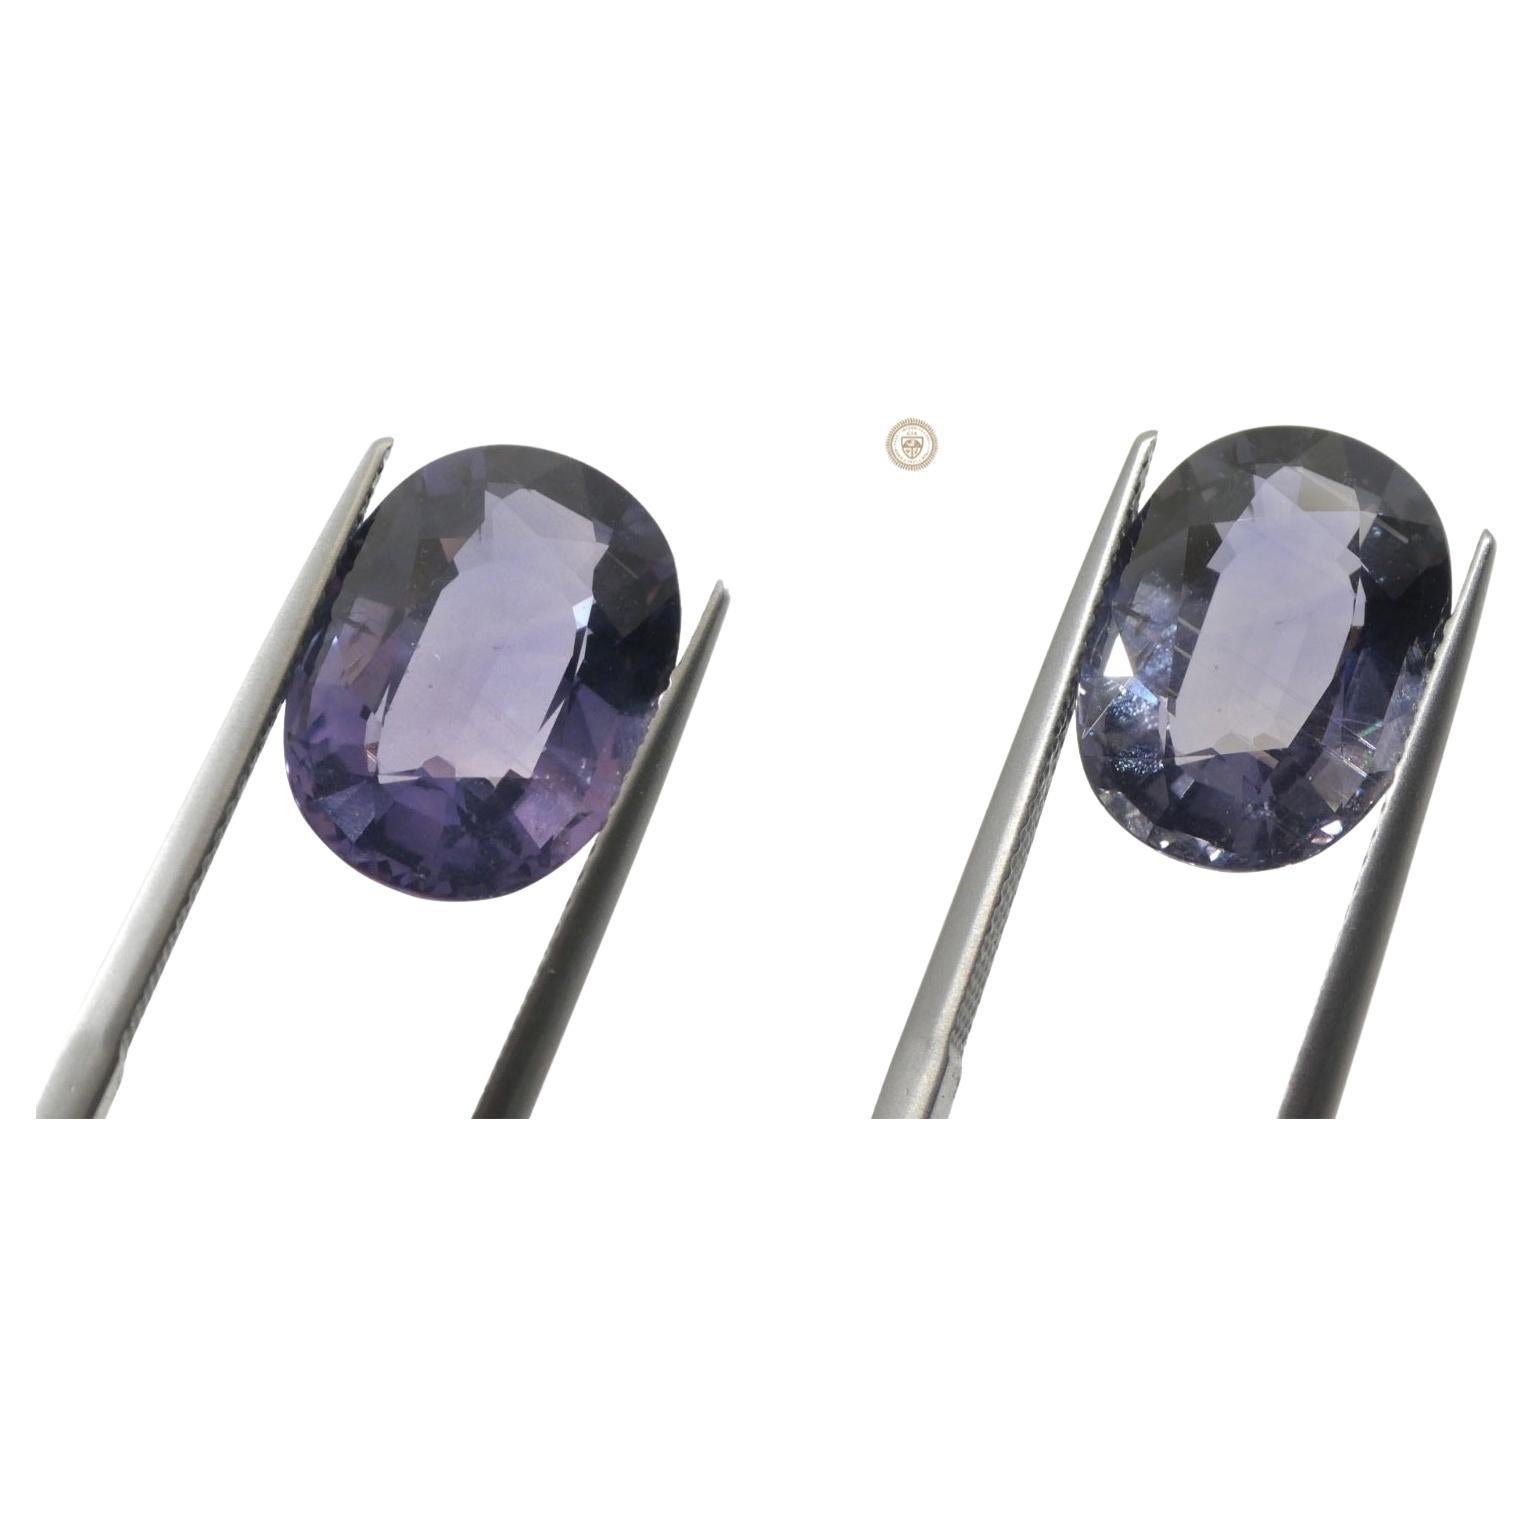 8.16ct Oval Grayish Violet to Pinkish Purple Sapphire GIA Certified For Sale